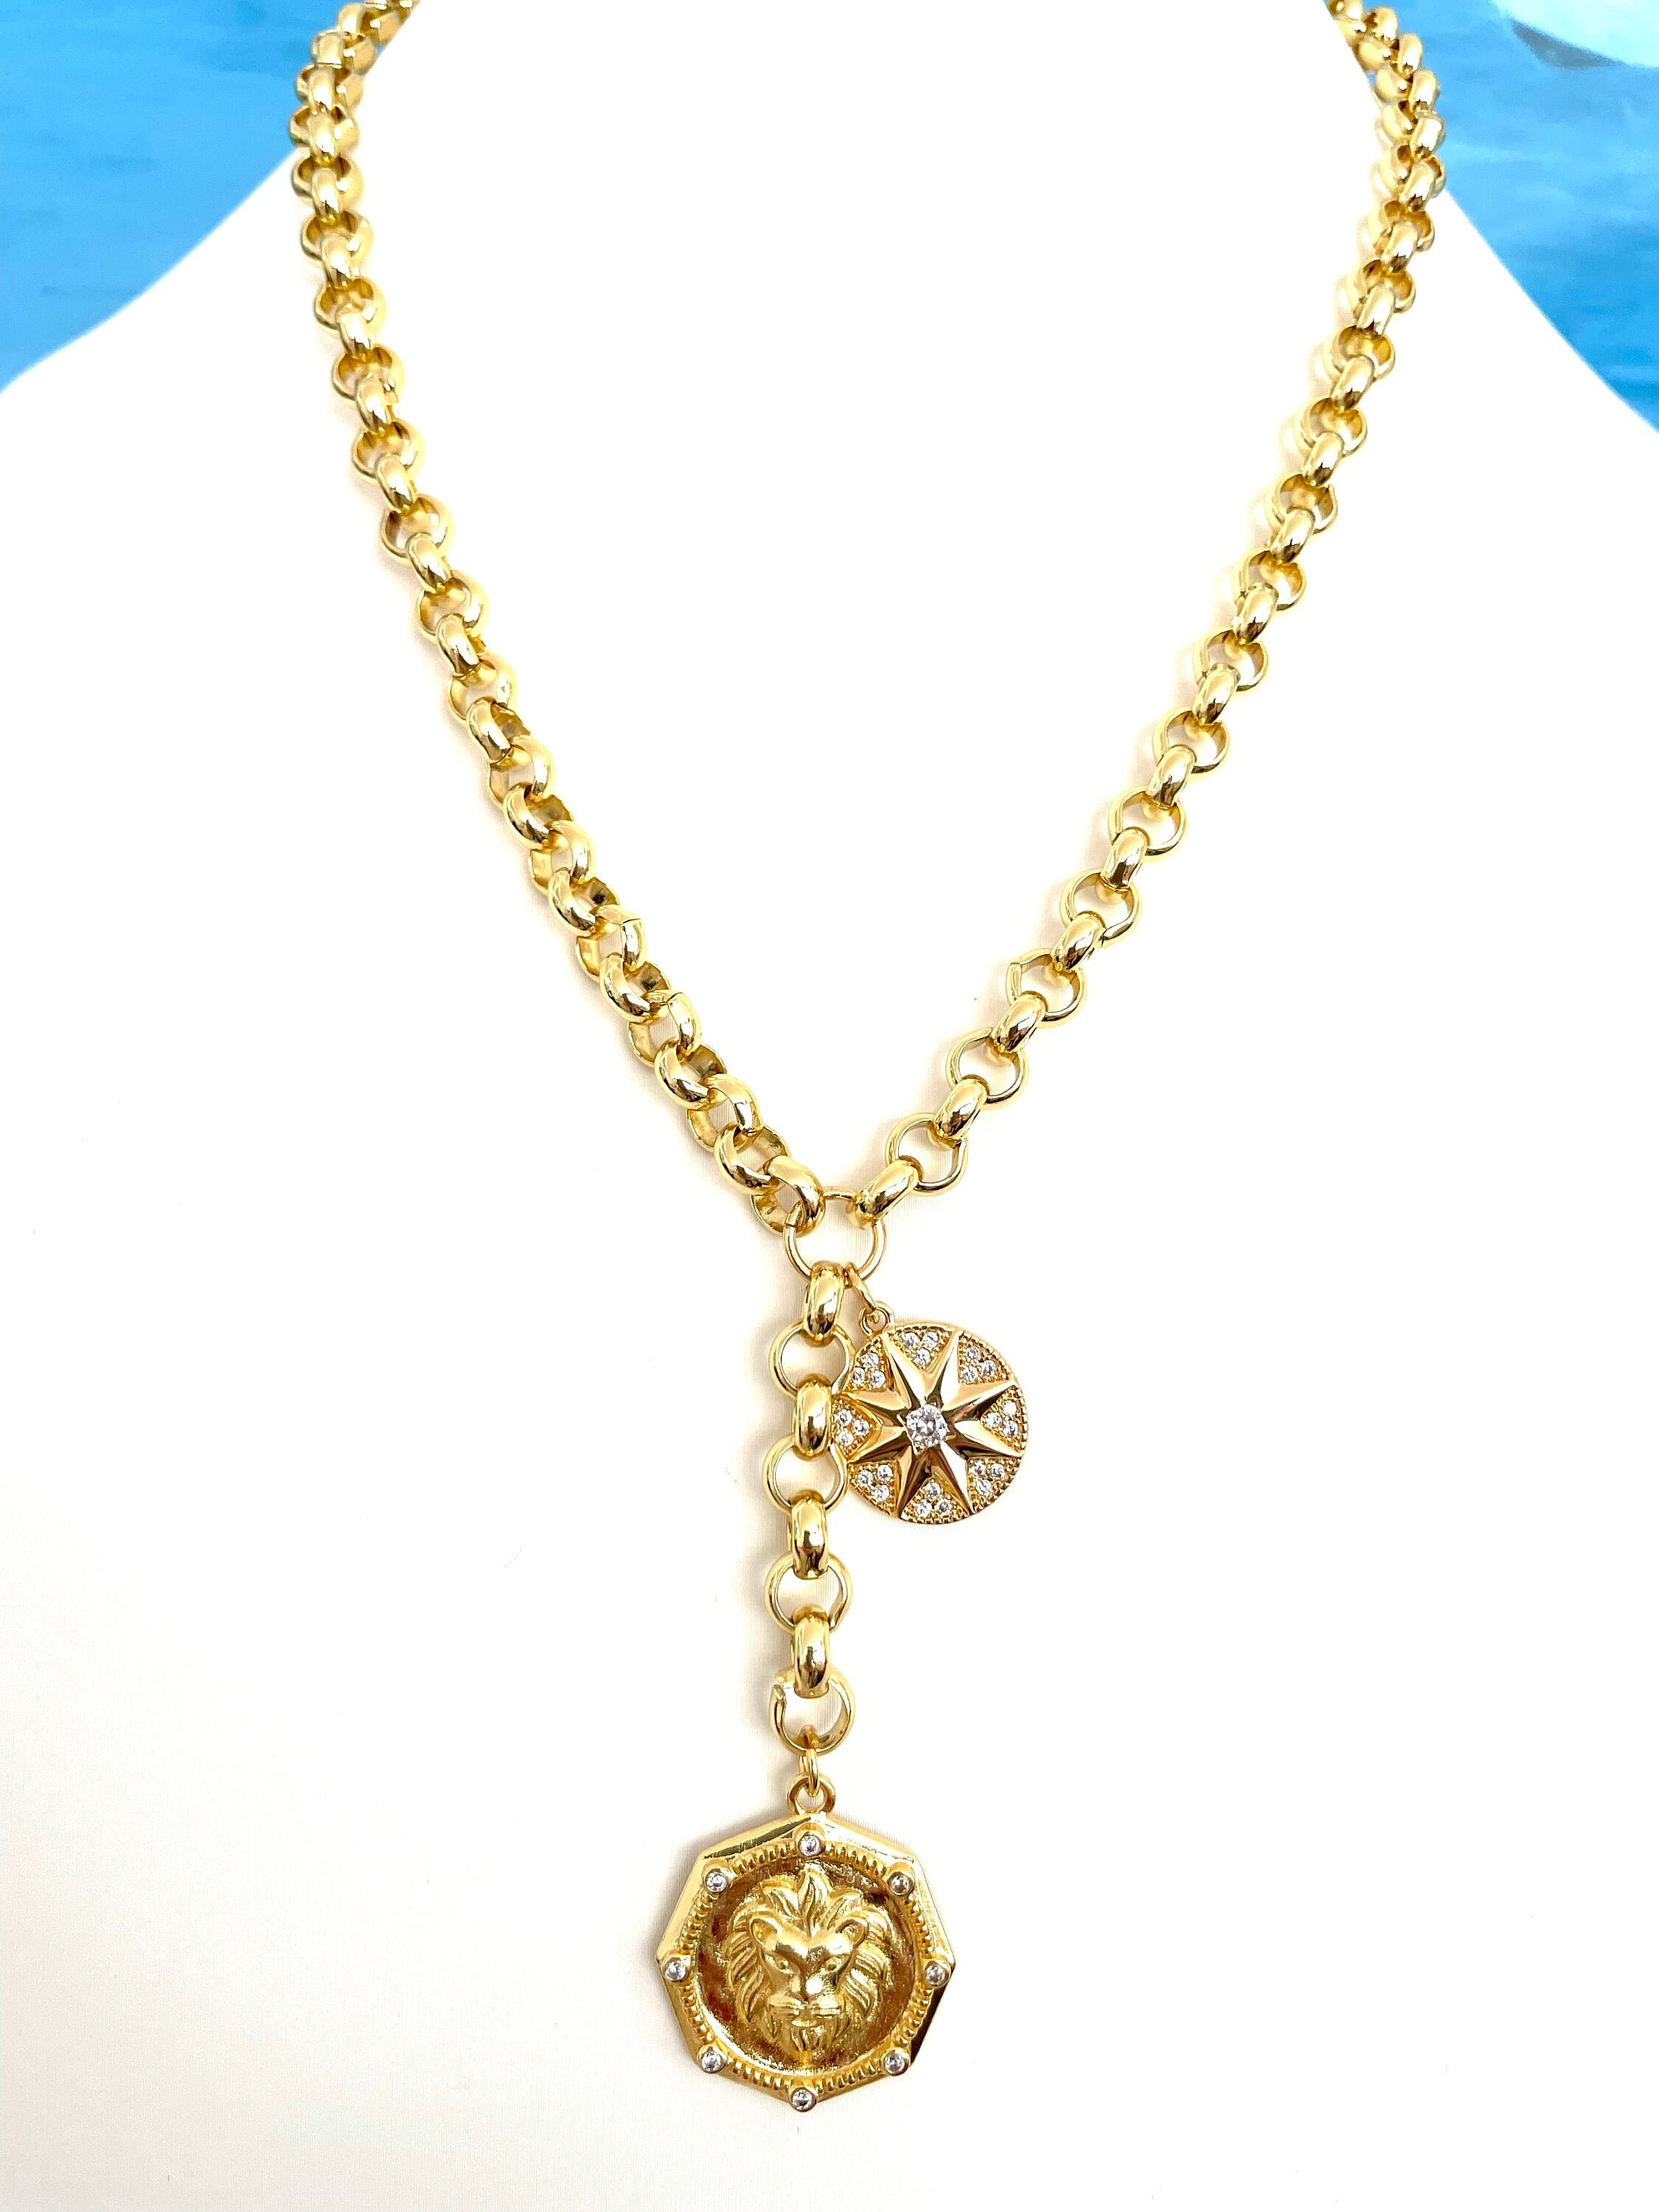 Rolo Chain Necklace With Lion Pendant Pave CZ North Star Charm 